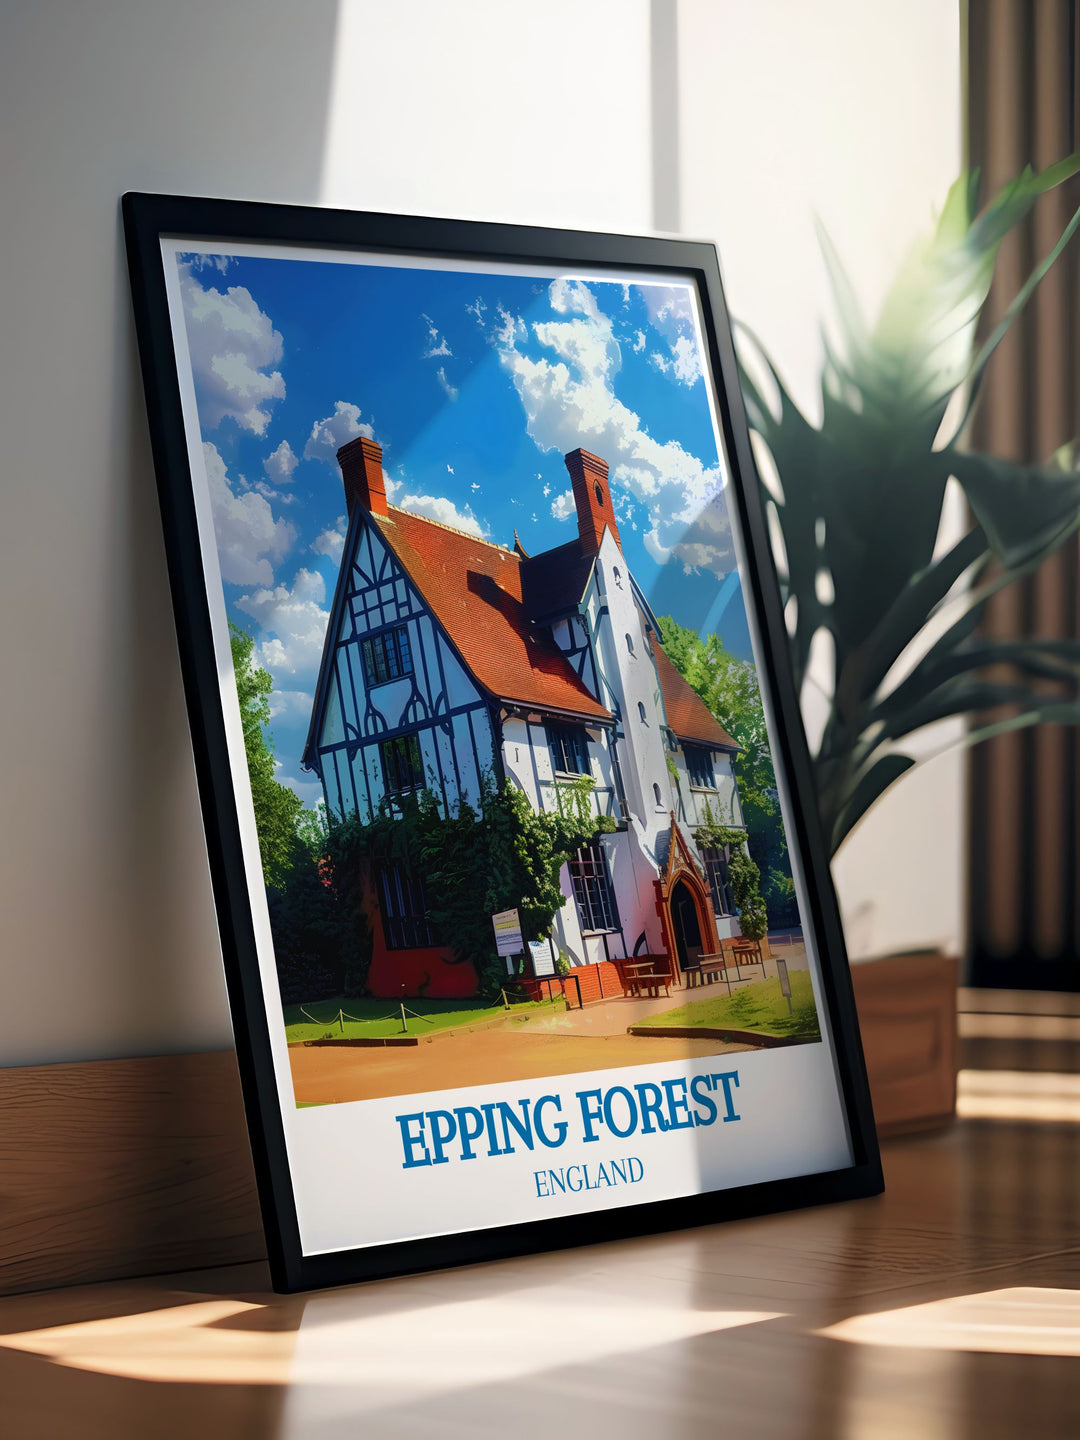 Canvas art depicting the rich history and natural beauty of Epping Forest, from its ancient trees to the historic hunting lodge.